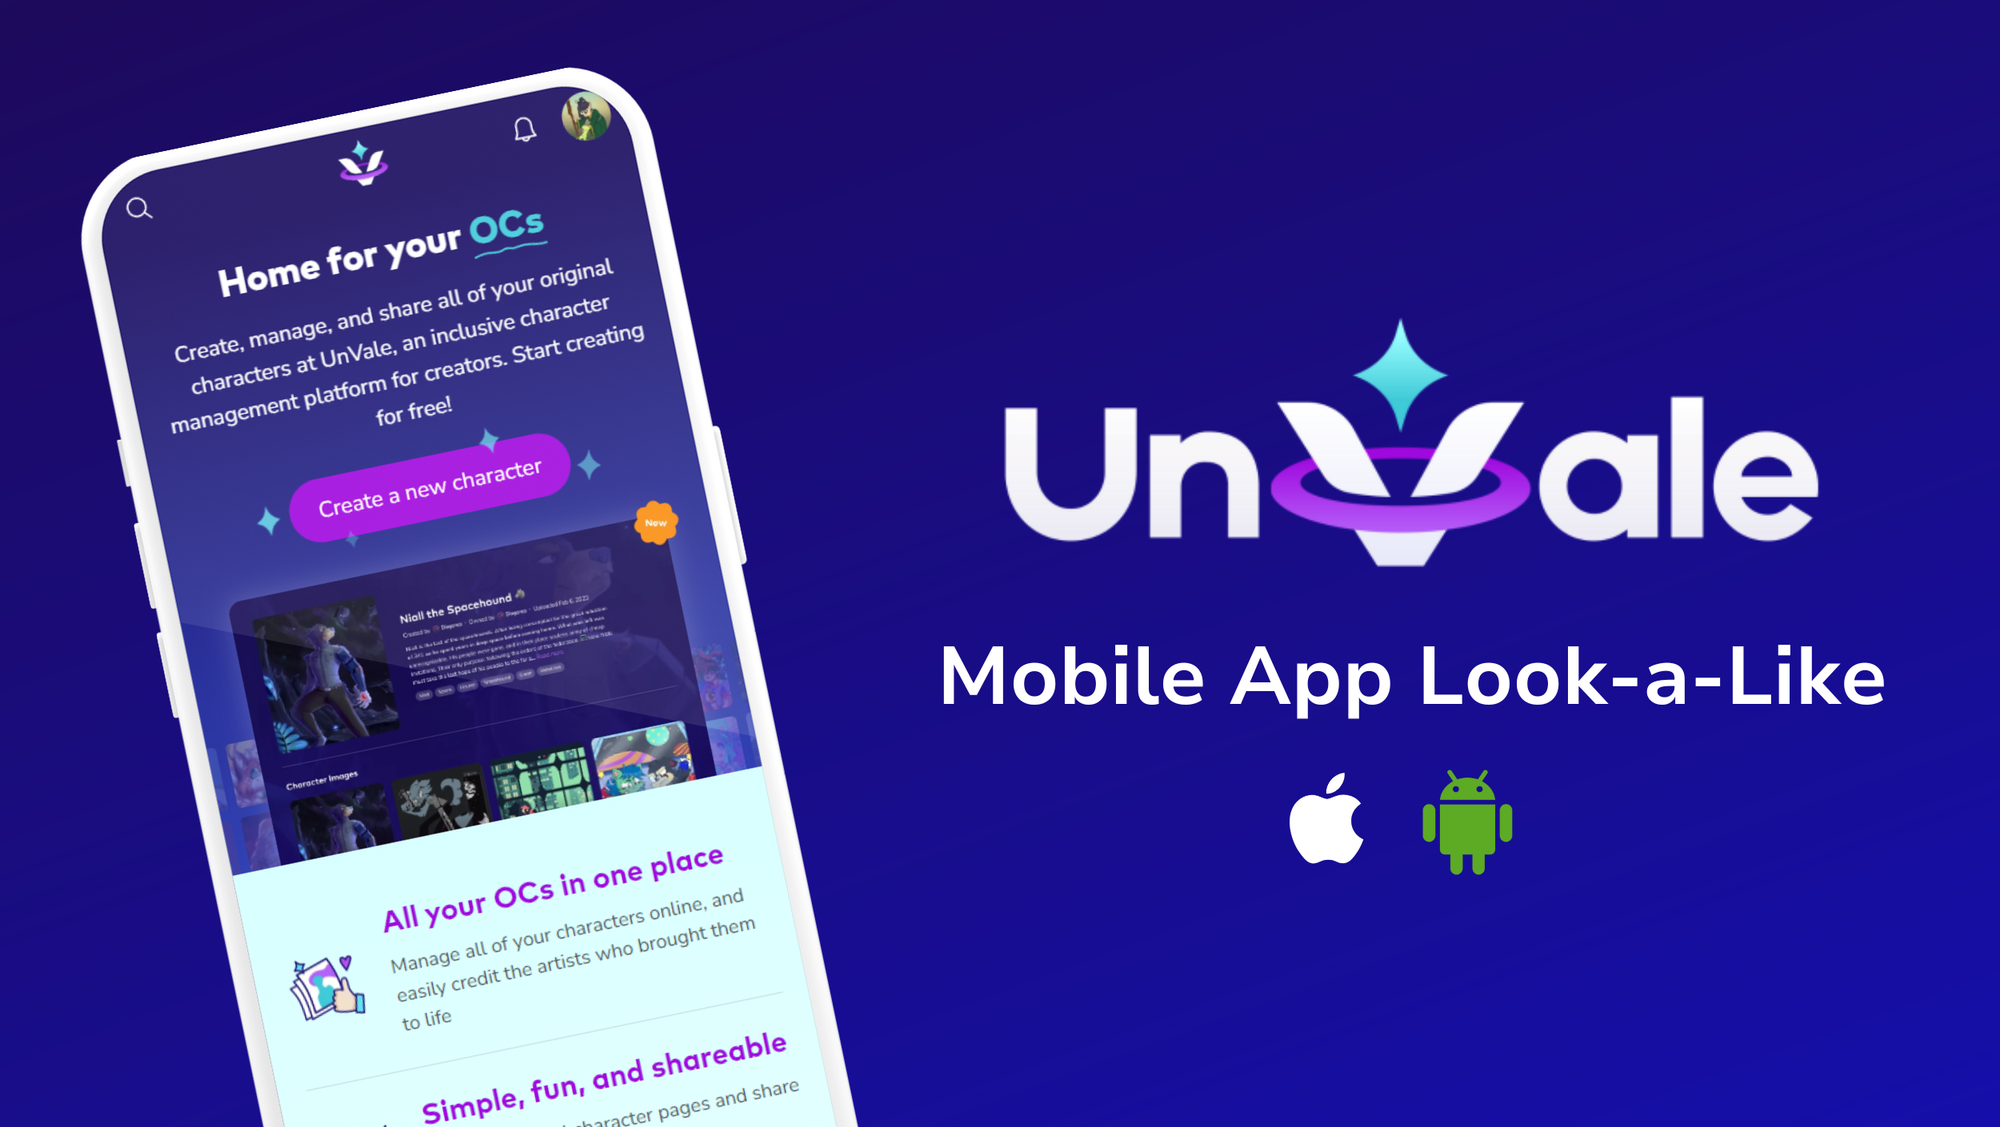 UnVale Mobile App Look-a-Like: How It Works